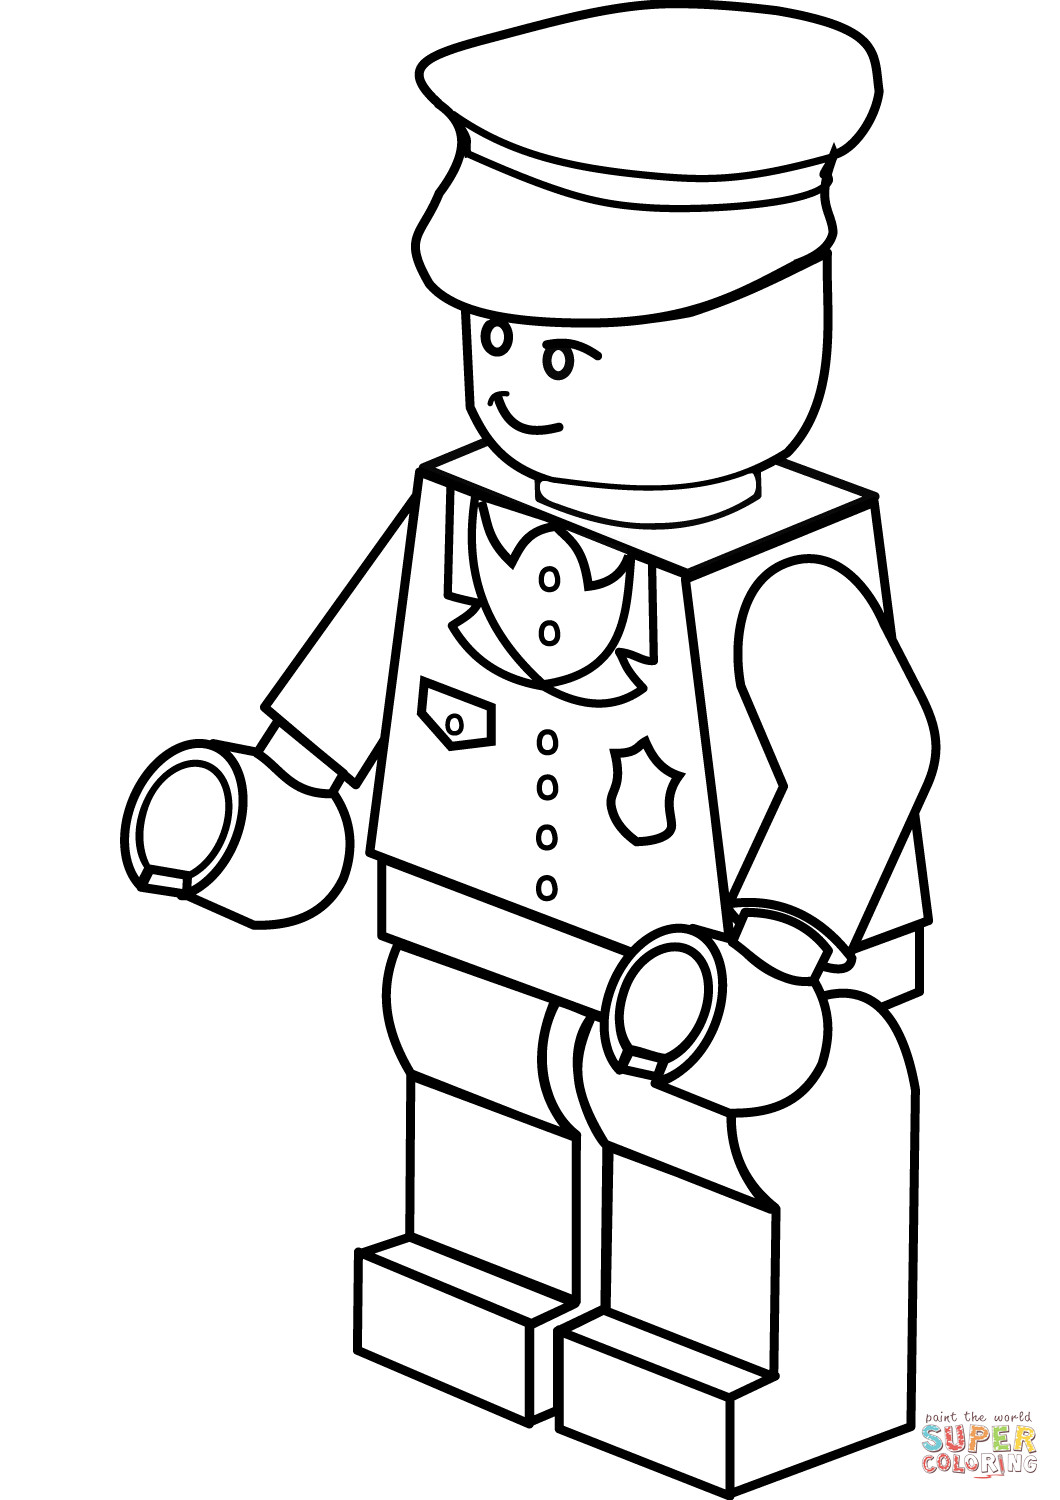 Lego Printable Coloring Pages
 Lego Policeman coloring page